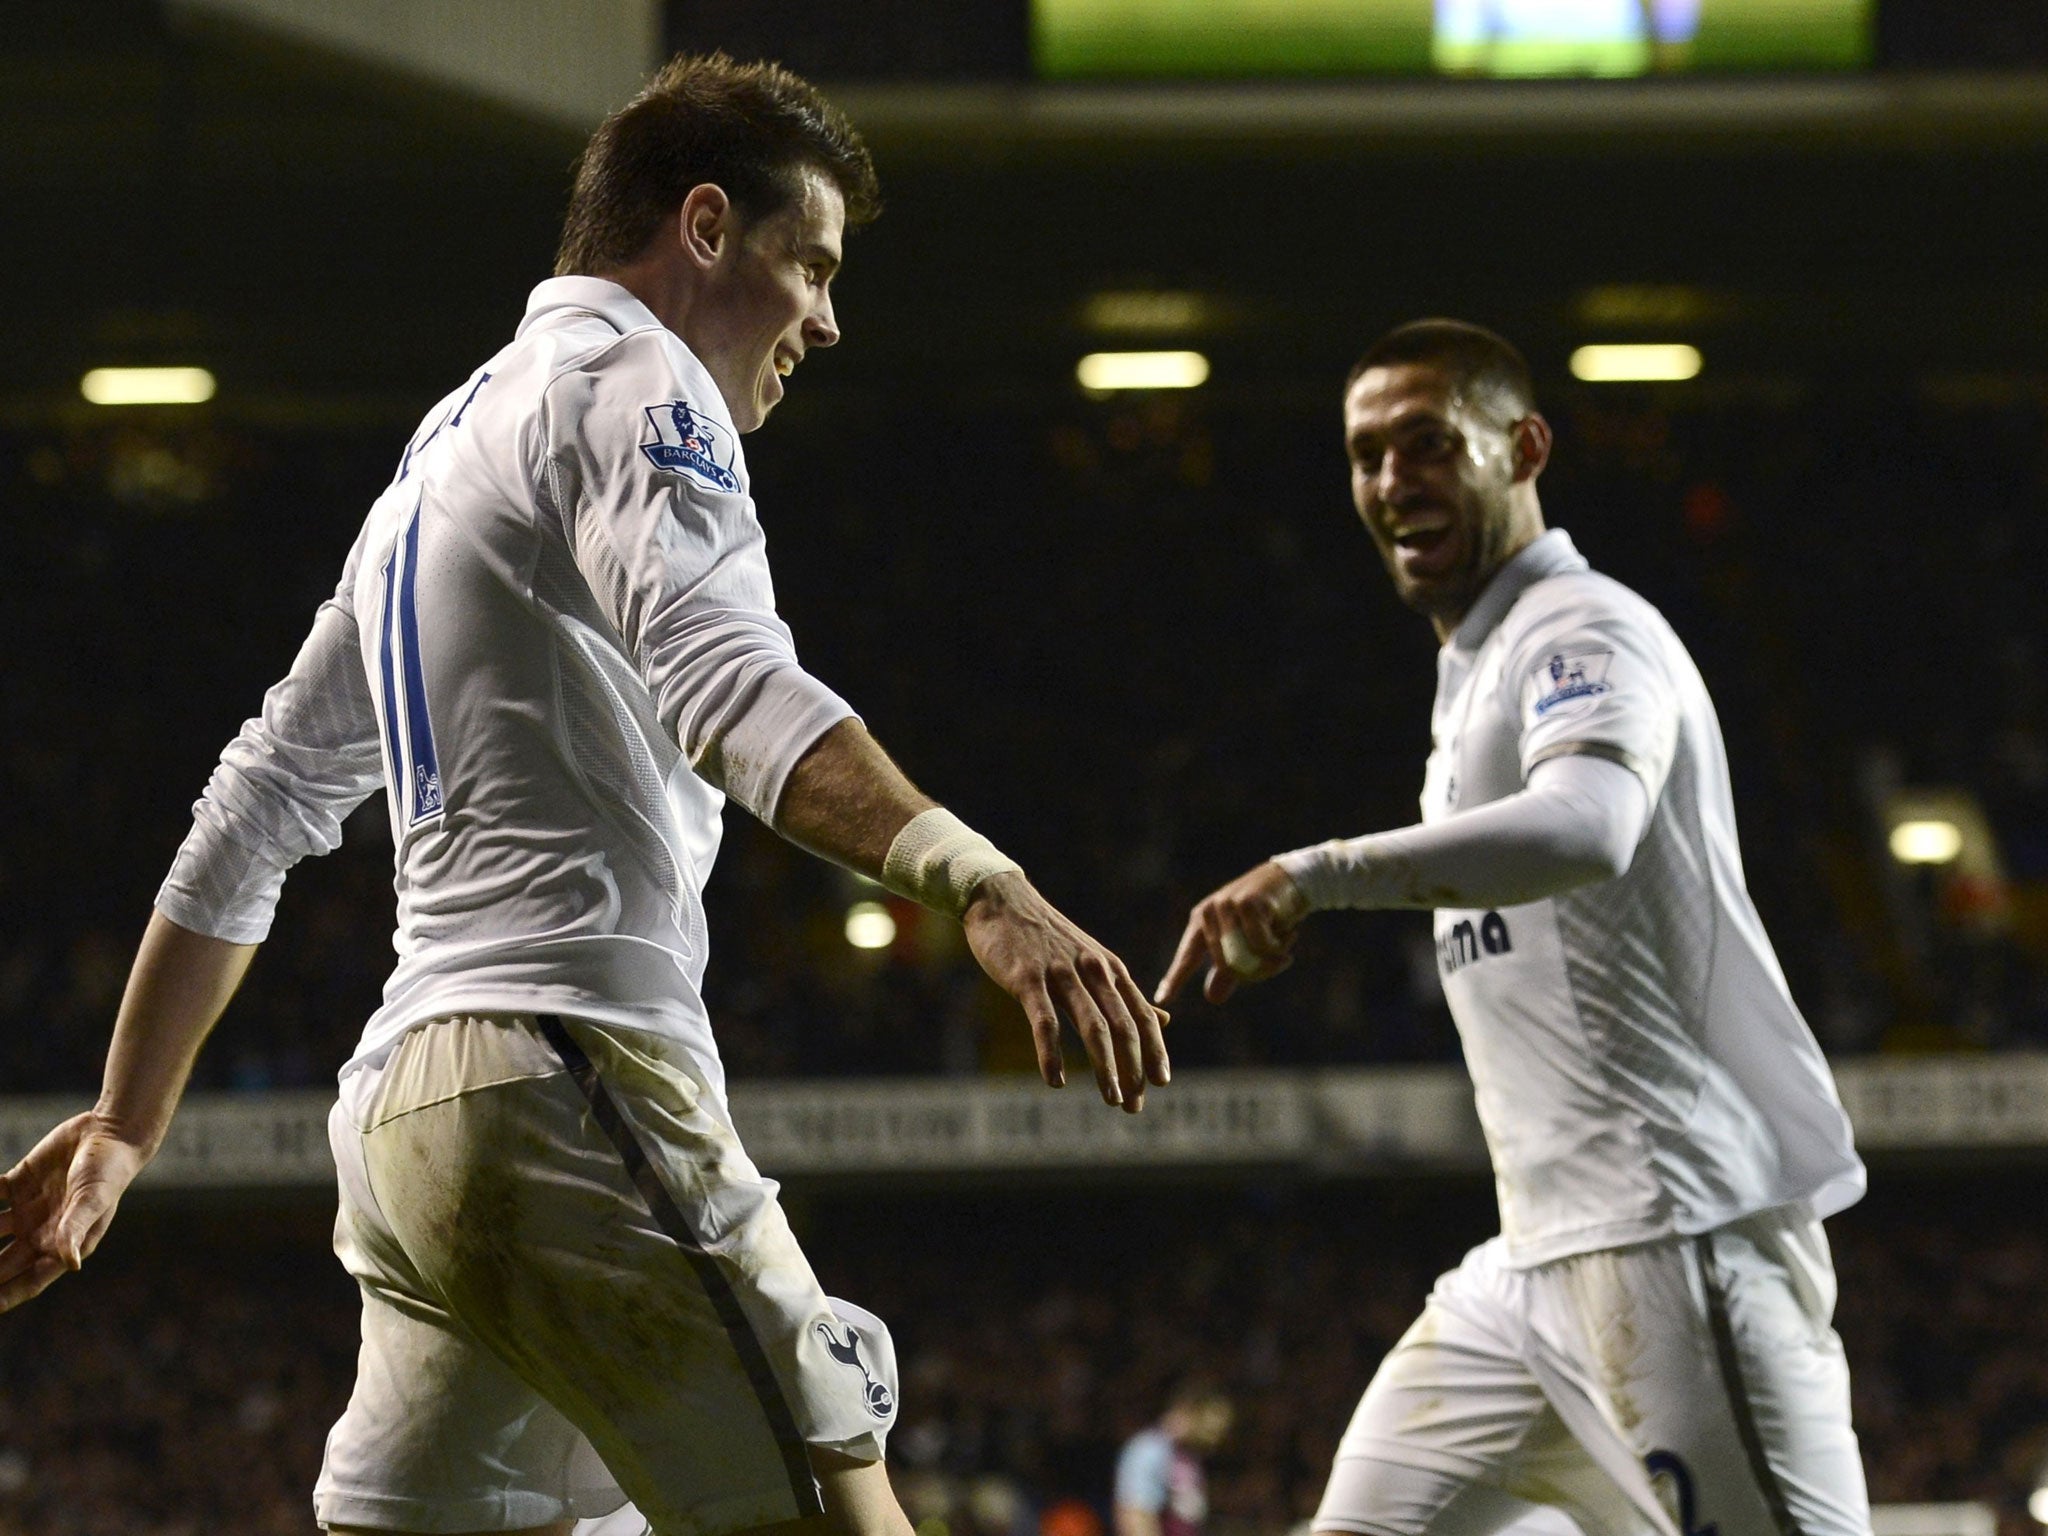 Beyond the Bale: Clint Dempsey (right) has proved an effective replacement for the injured Gareth Bale